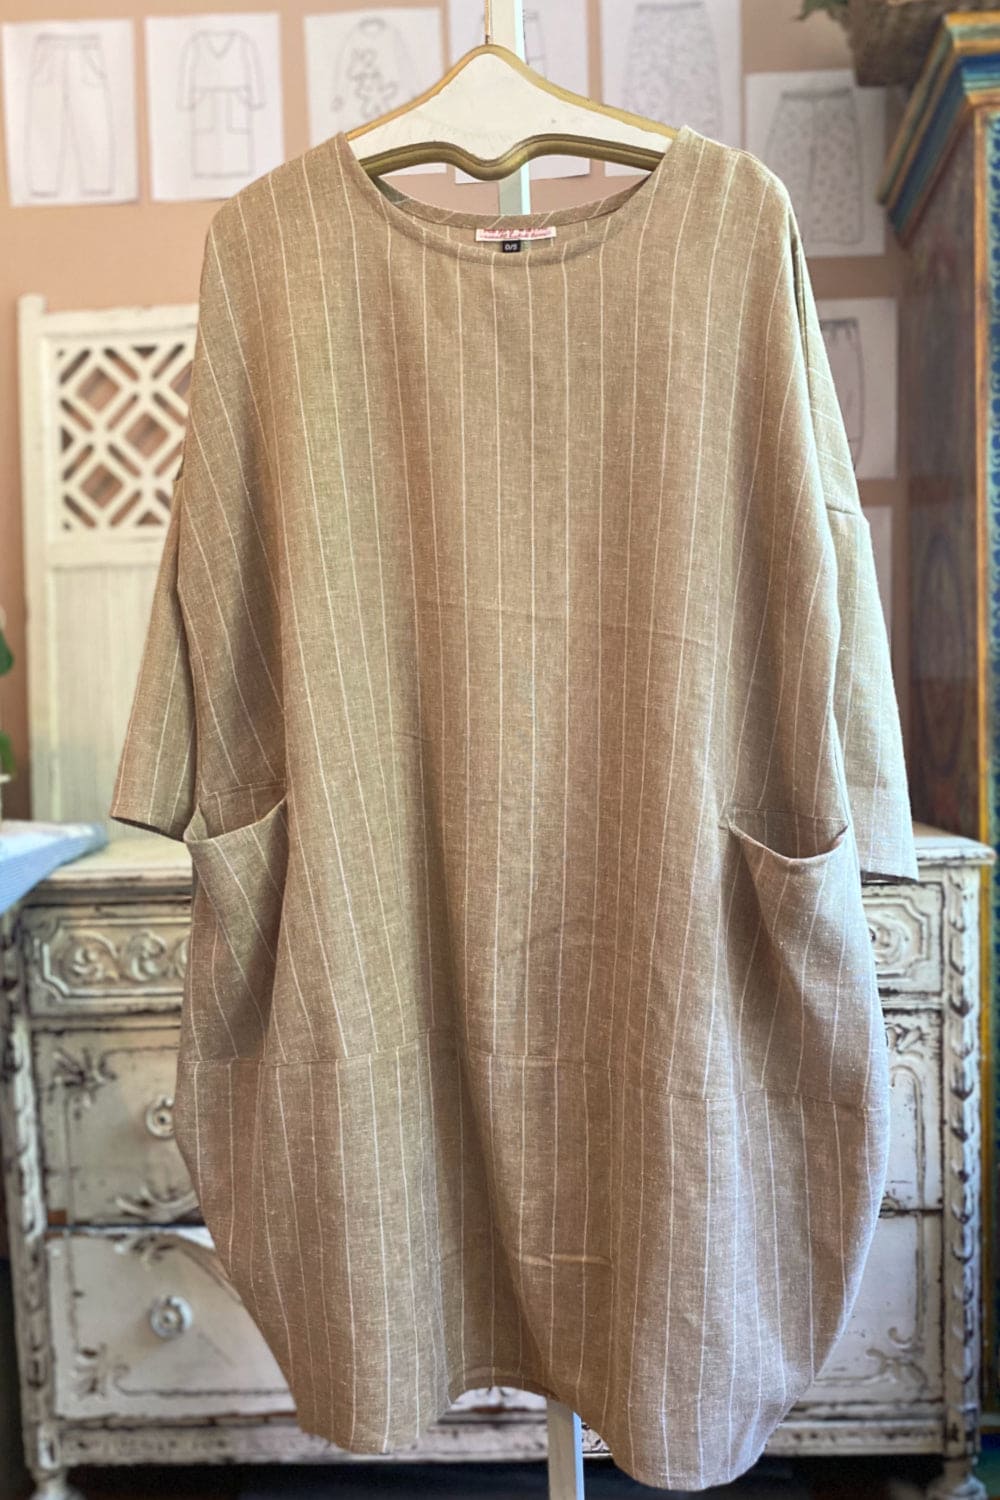 Long sleeve linen dress with a full cut and two front pockets.